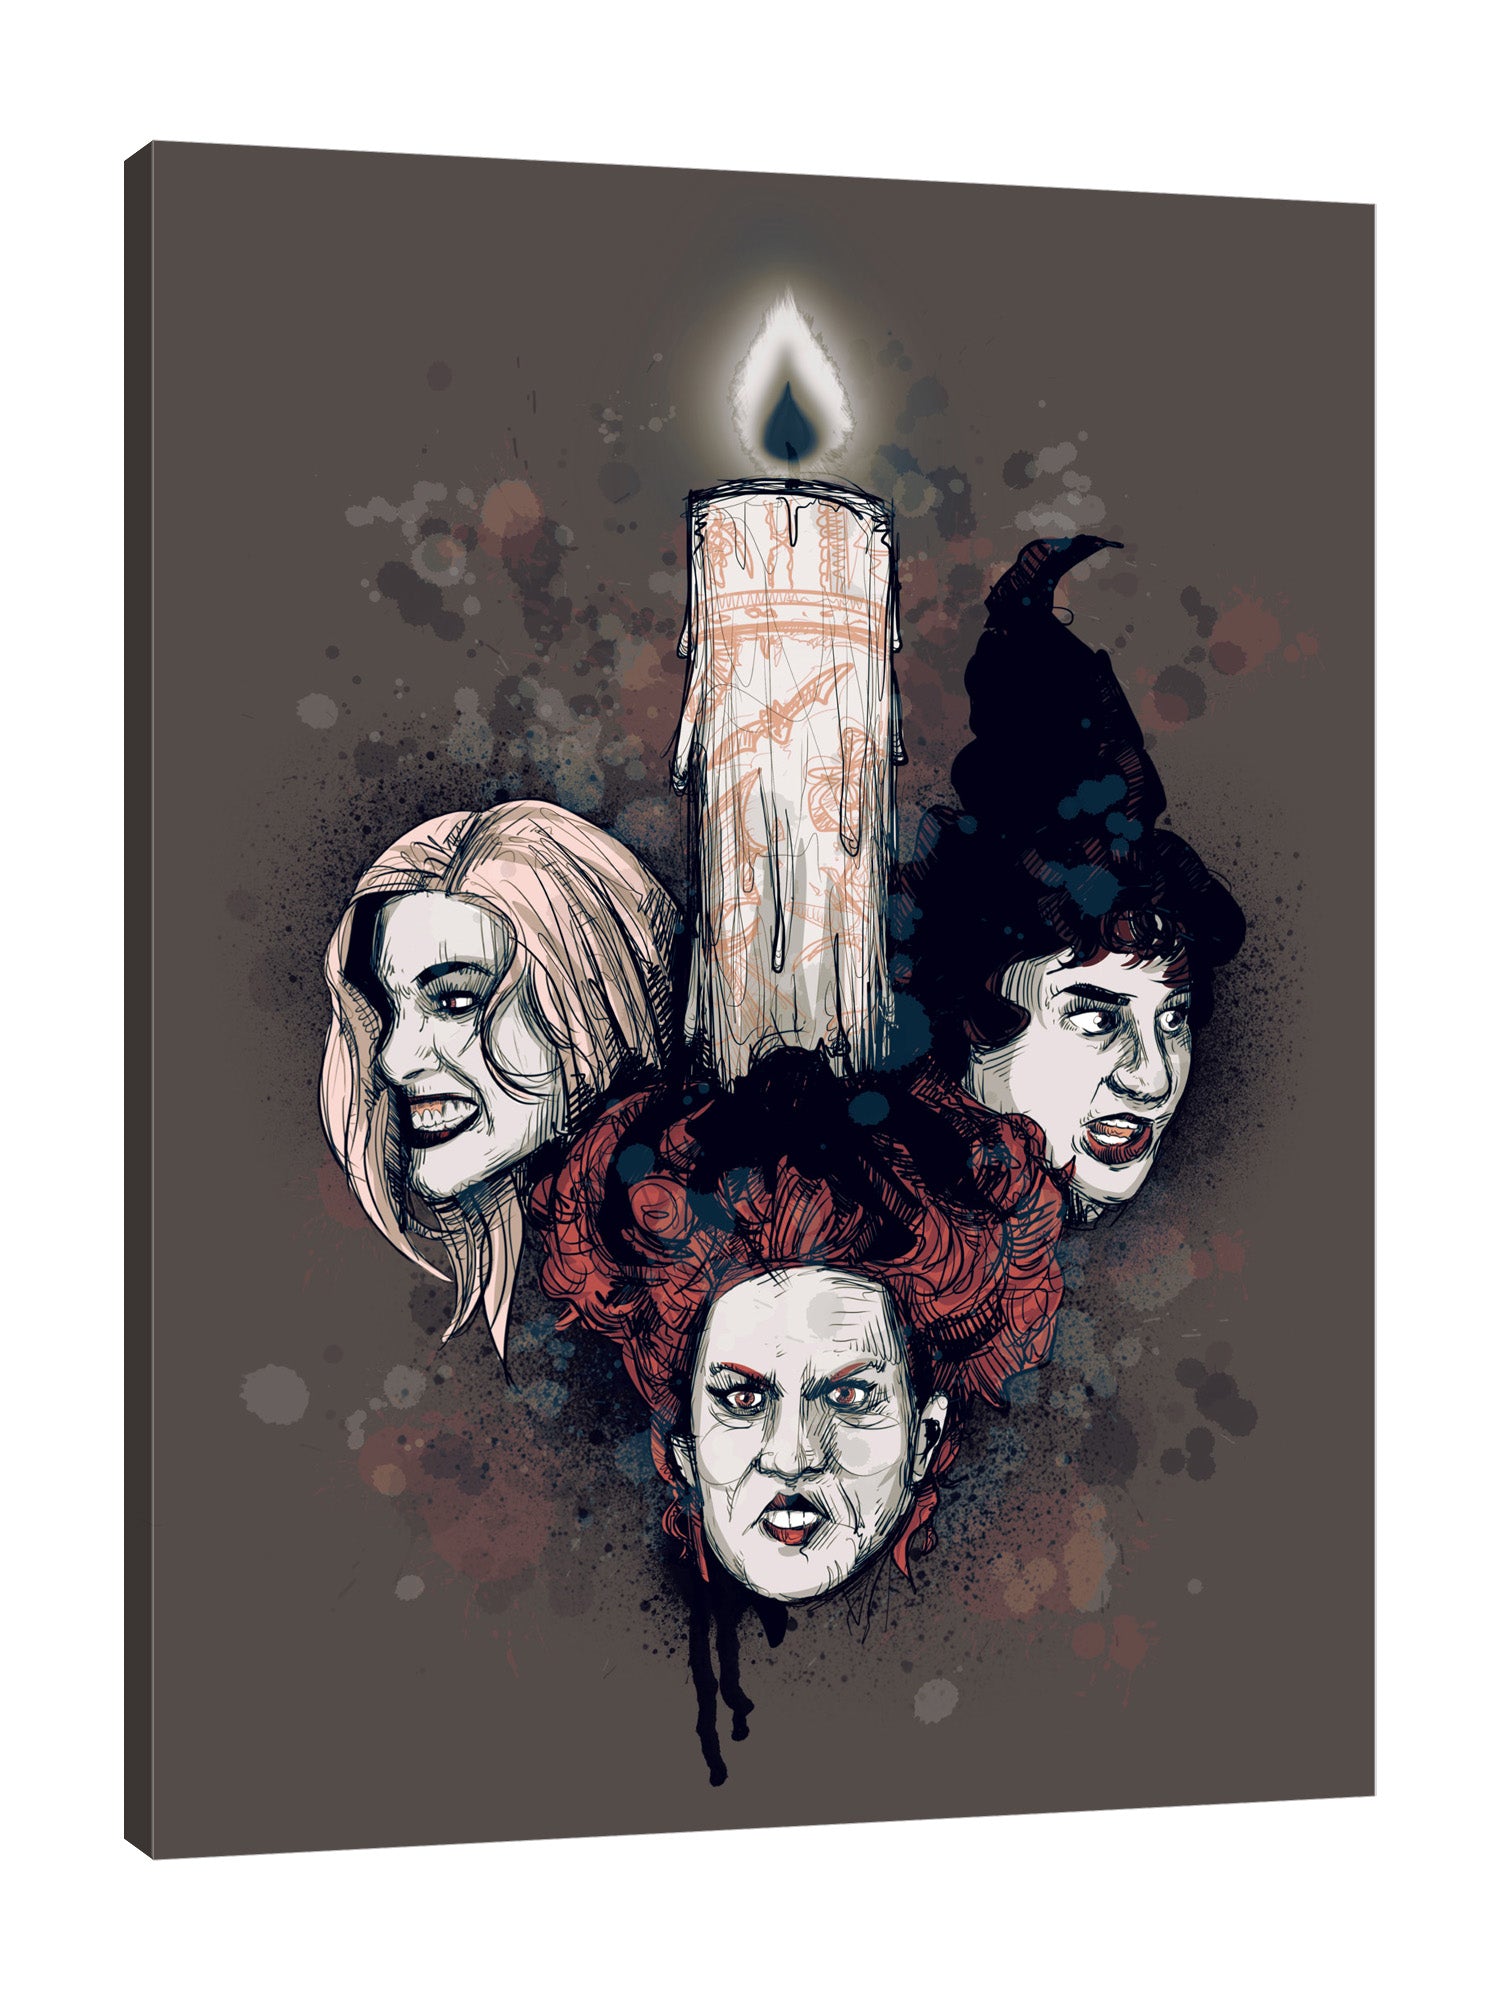 Ludwig-Van-Bacon,Vertical,3X4,Modern & Contemporary,People,Entertainment,woman,women,witch,angry,scary faces,candle,candles.dripping,drip,drips,black flame,brown,spots,spot,Charcoal Gray,White,Black,Rose Red,Purple,Blue